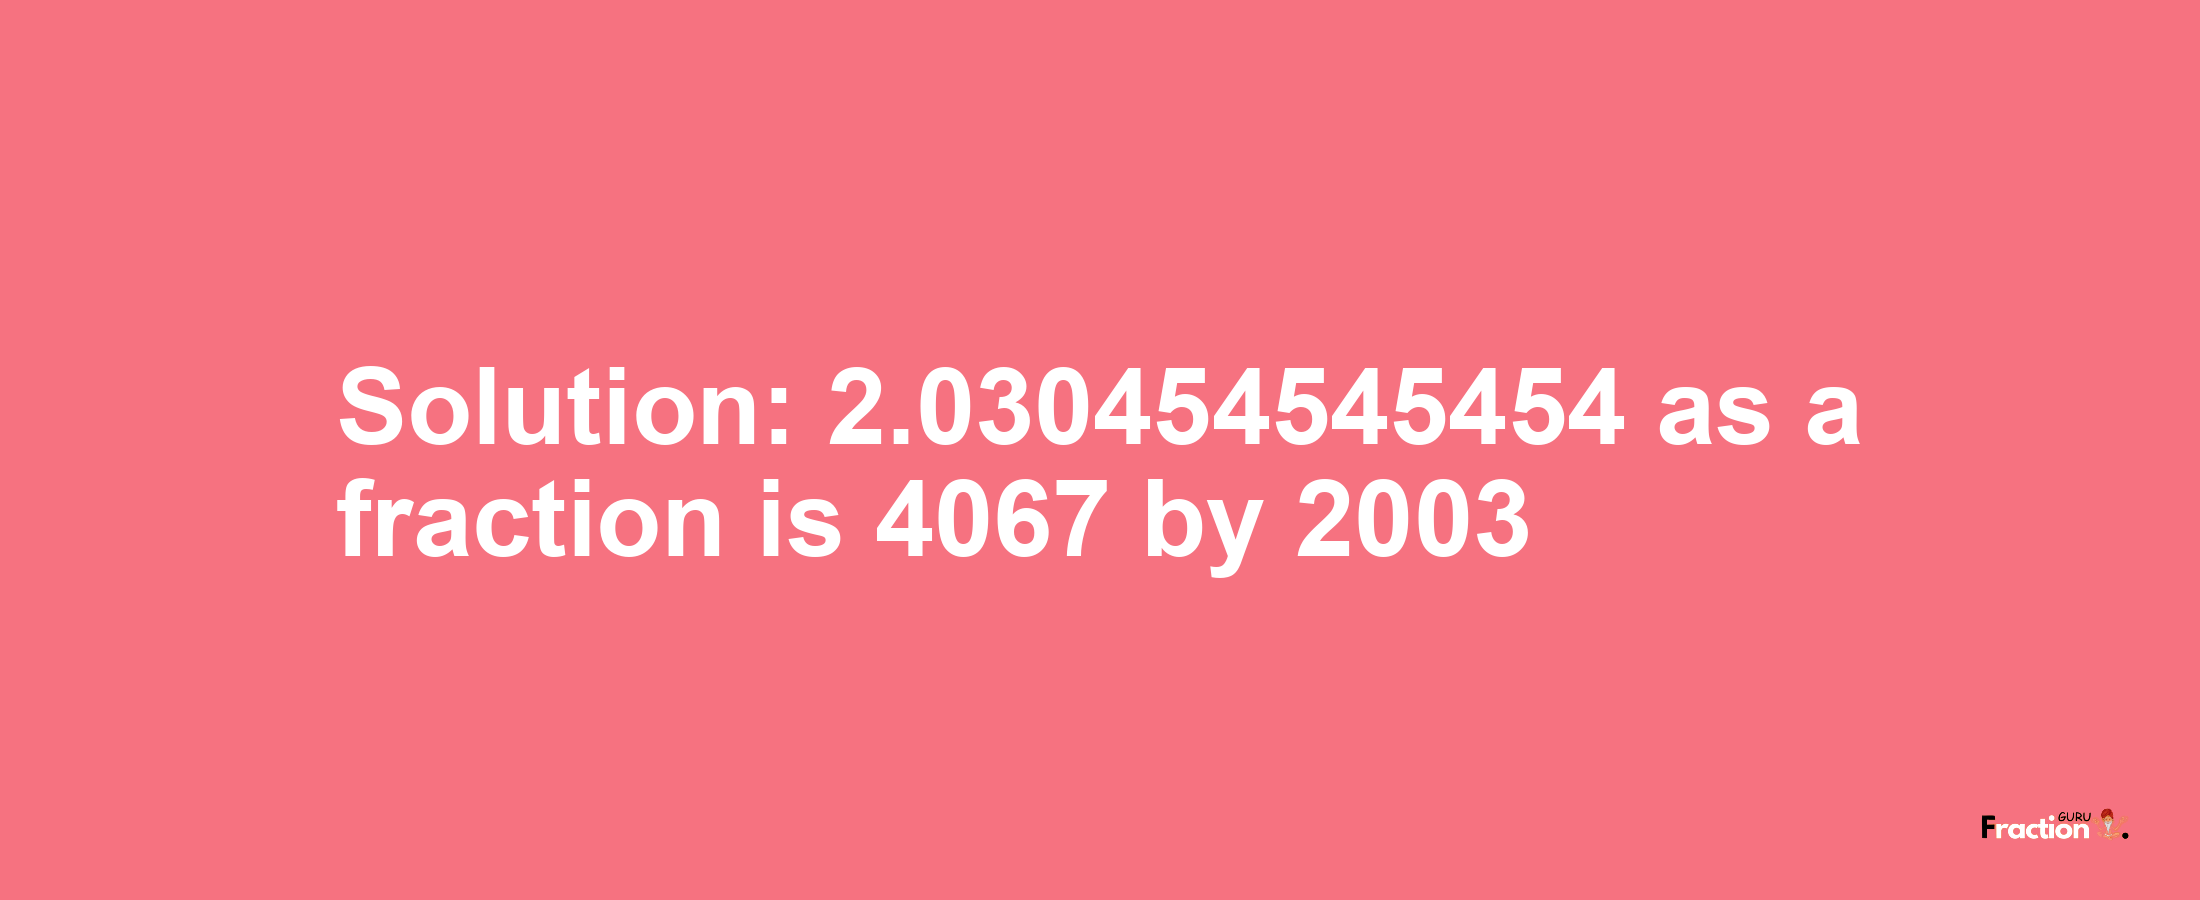 Solution:2.030454545454 as a fraction is 4067/2003